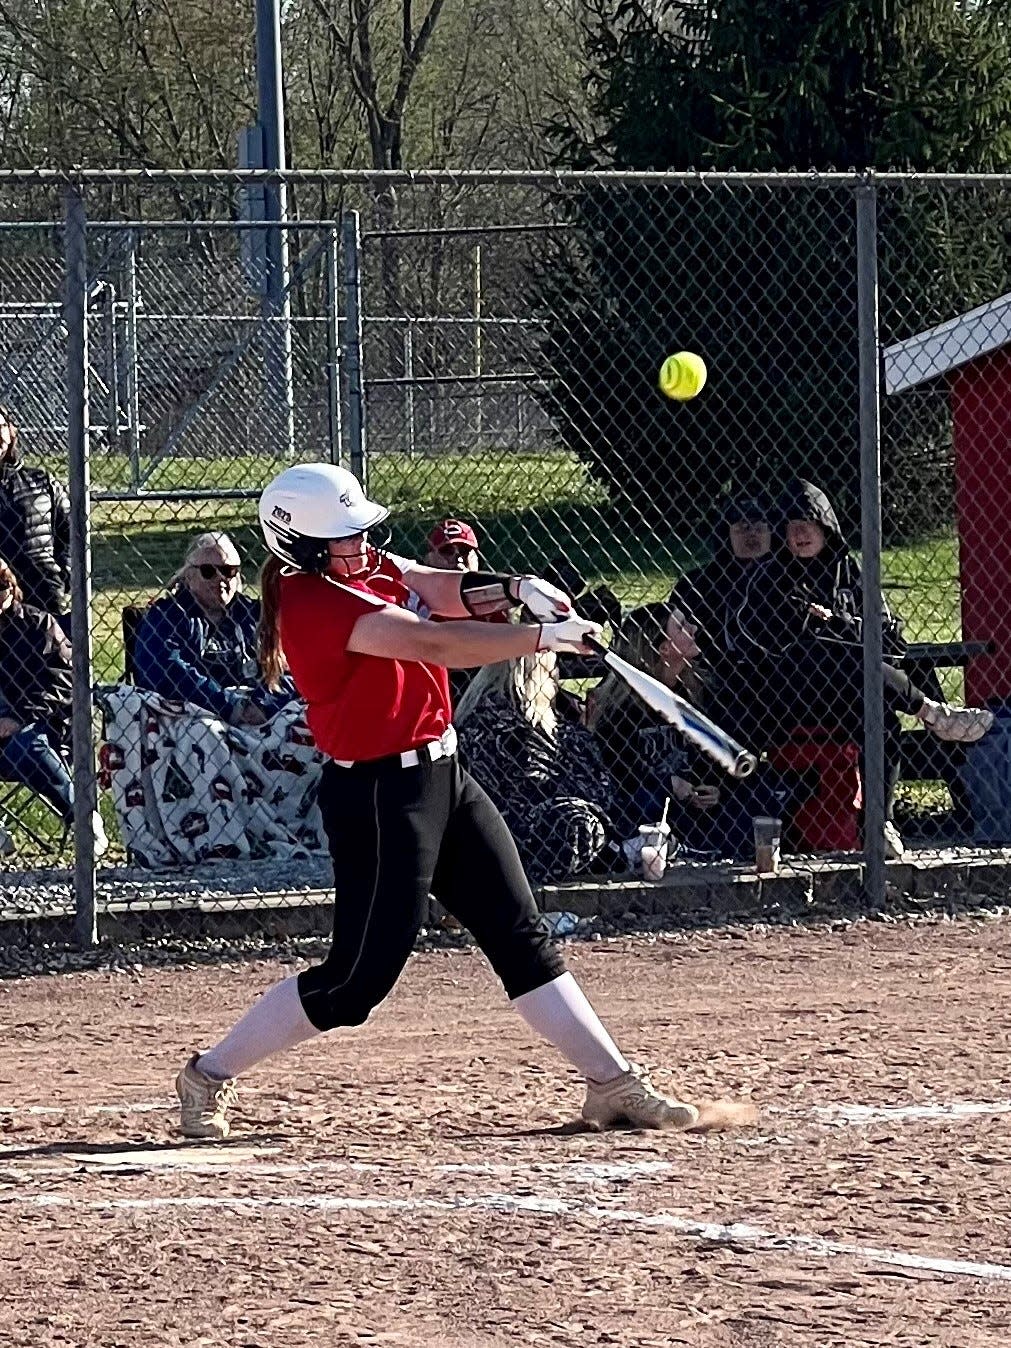 Ridgedale's Kenzie Delaney hits the ball during a home softball game against Ridgedale last year. She is the reigning Marion Star Softball Player of the Year.